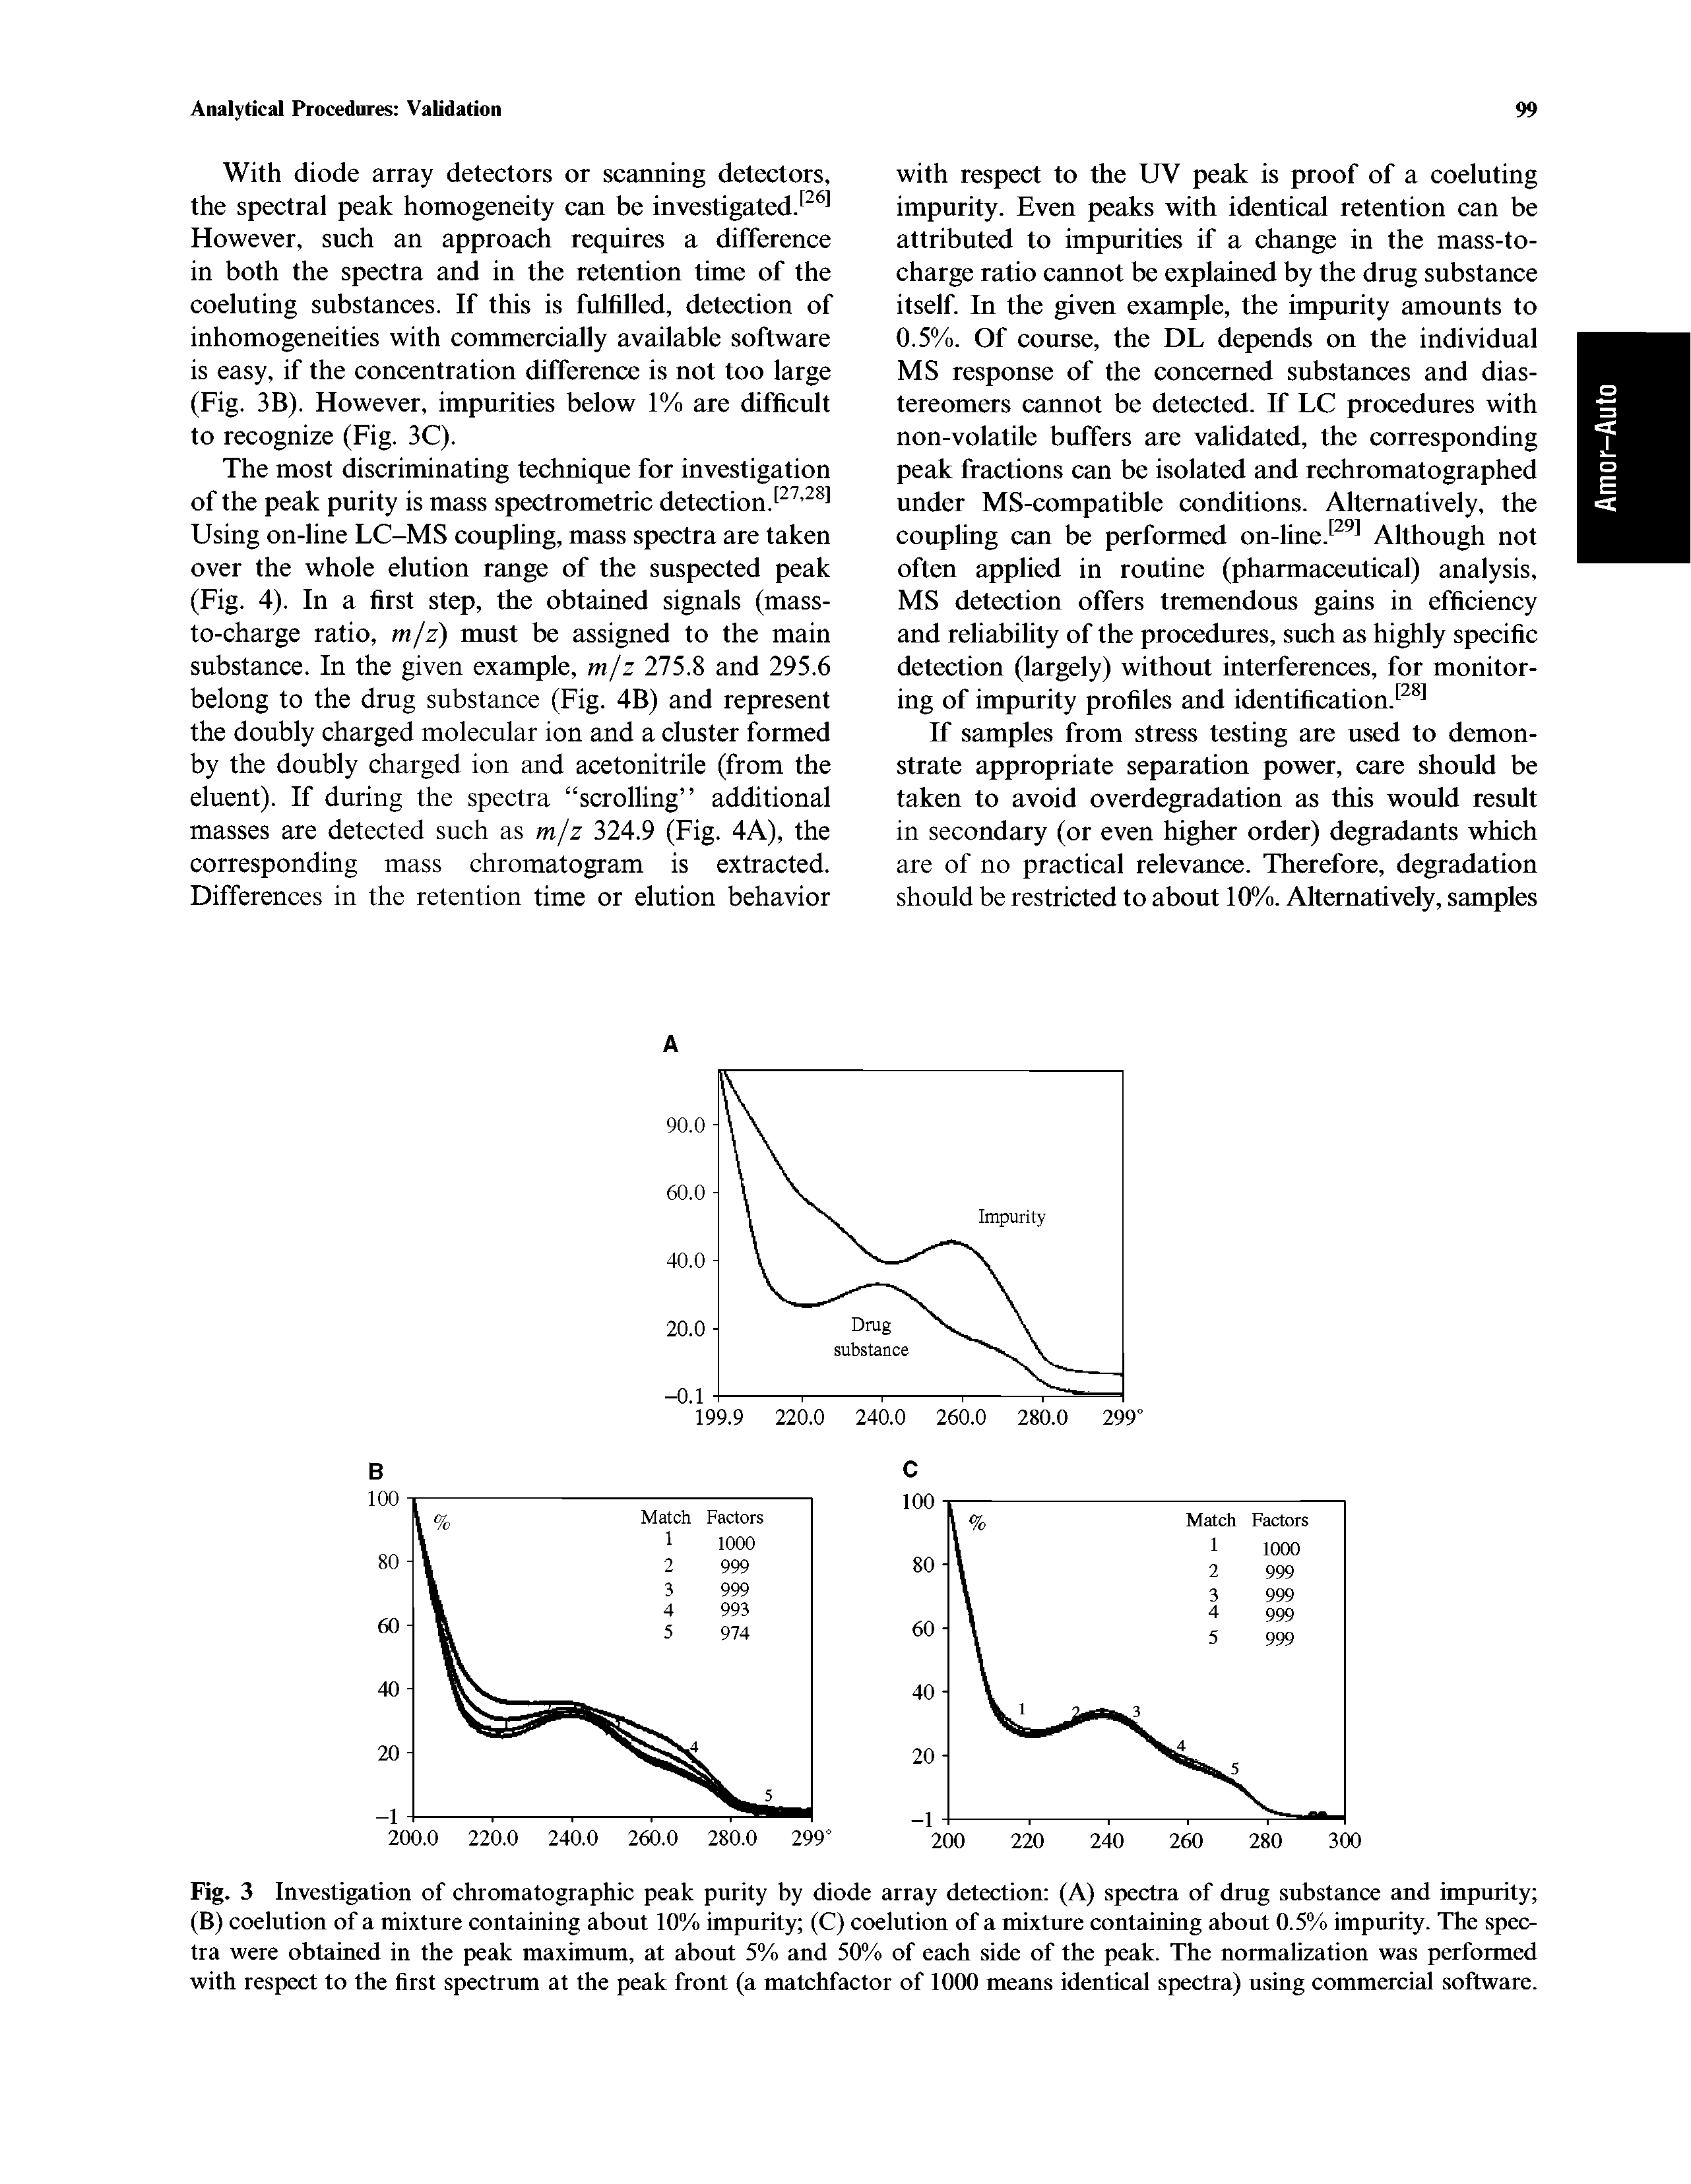 Fig. 3 Investigation of chromatographic peak purity by diode array detection (A) spectra of drug substance and impurity (B) coelution of a mixture containing about 10% impurity (C) coelution of a mixture containing about 0.5% impurity. The spectra were obtained in the peak maximum, at about 5% and 50% of each side of the peak. The normalization was performed with respect to the first spectrum at the peak front (a matchfactor of 1000 means identical spectra) using commercial software.